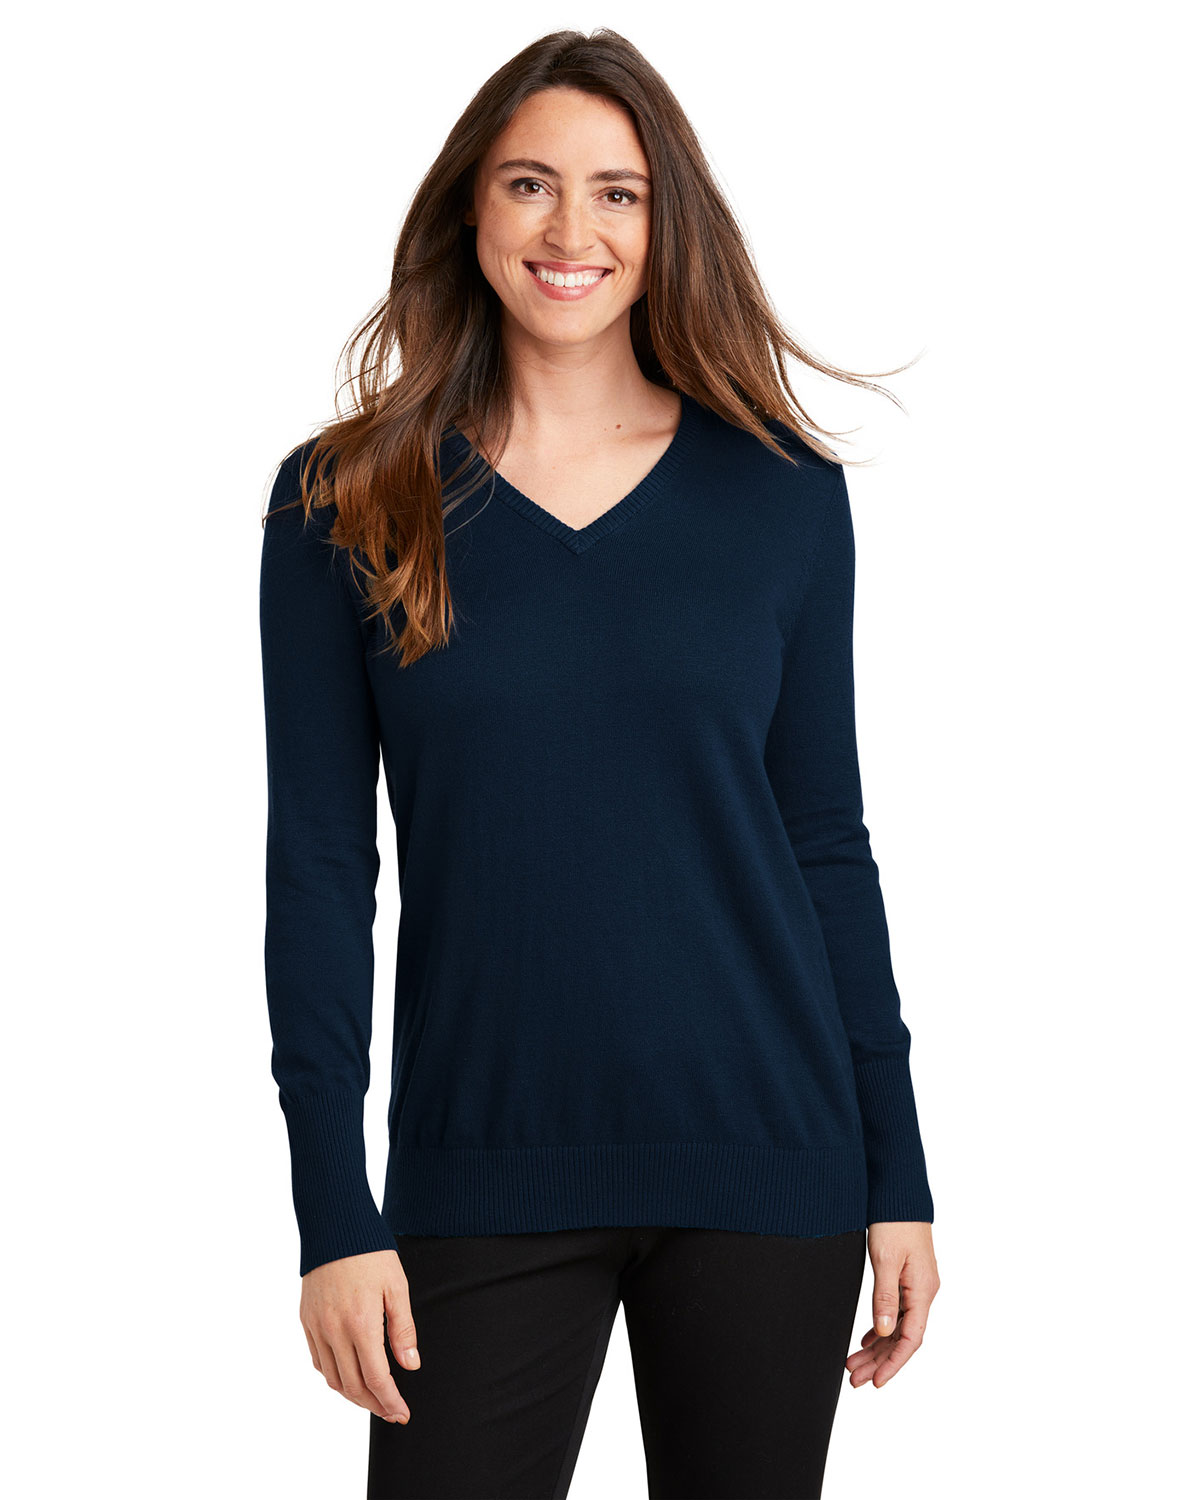 Port Authority LSW285 Women V-Neck Sweater at Apparelstation